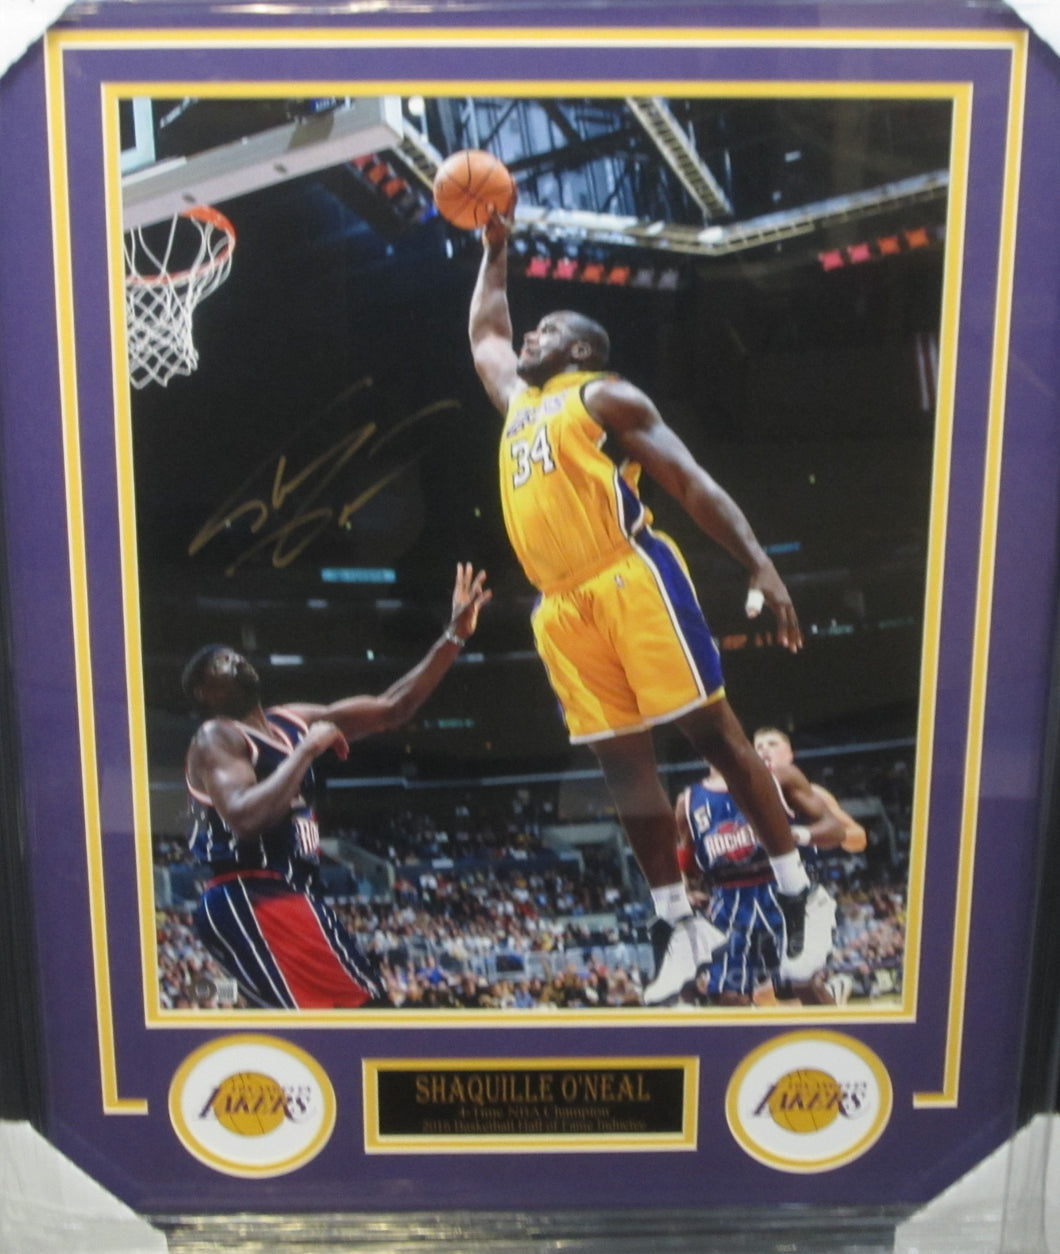 Los Angeles Lakers Shaquille O'Neal Signed 16x20 Photo Framed & Matted with BECKETT COA